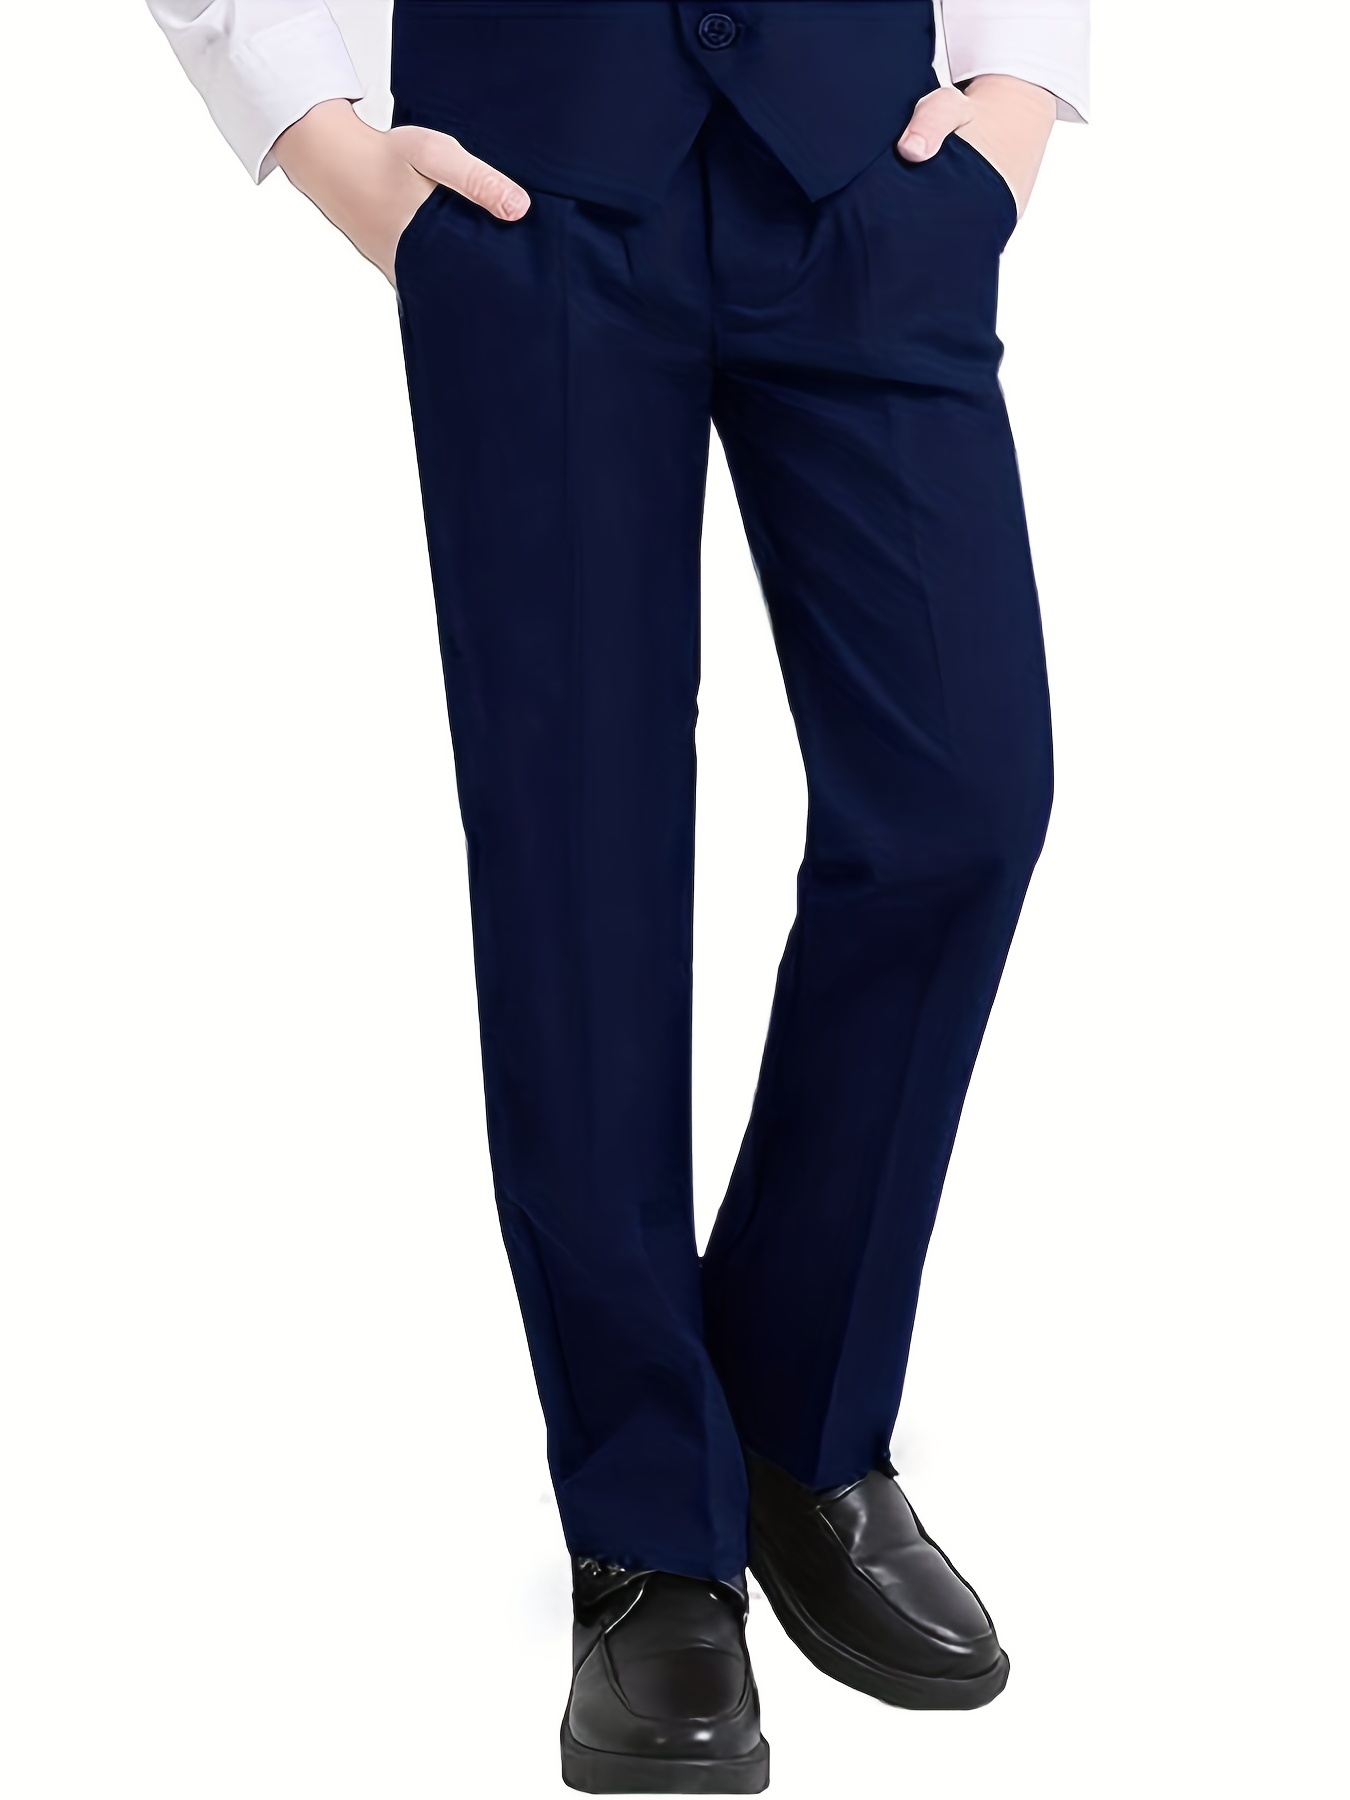 Boys Formal Gentleman Pants, Kids Clothing Set For Competition